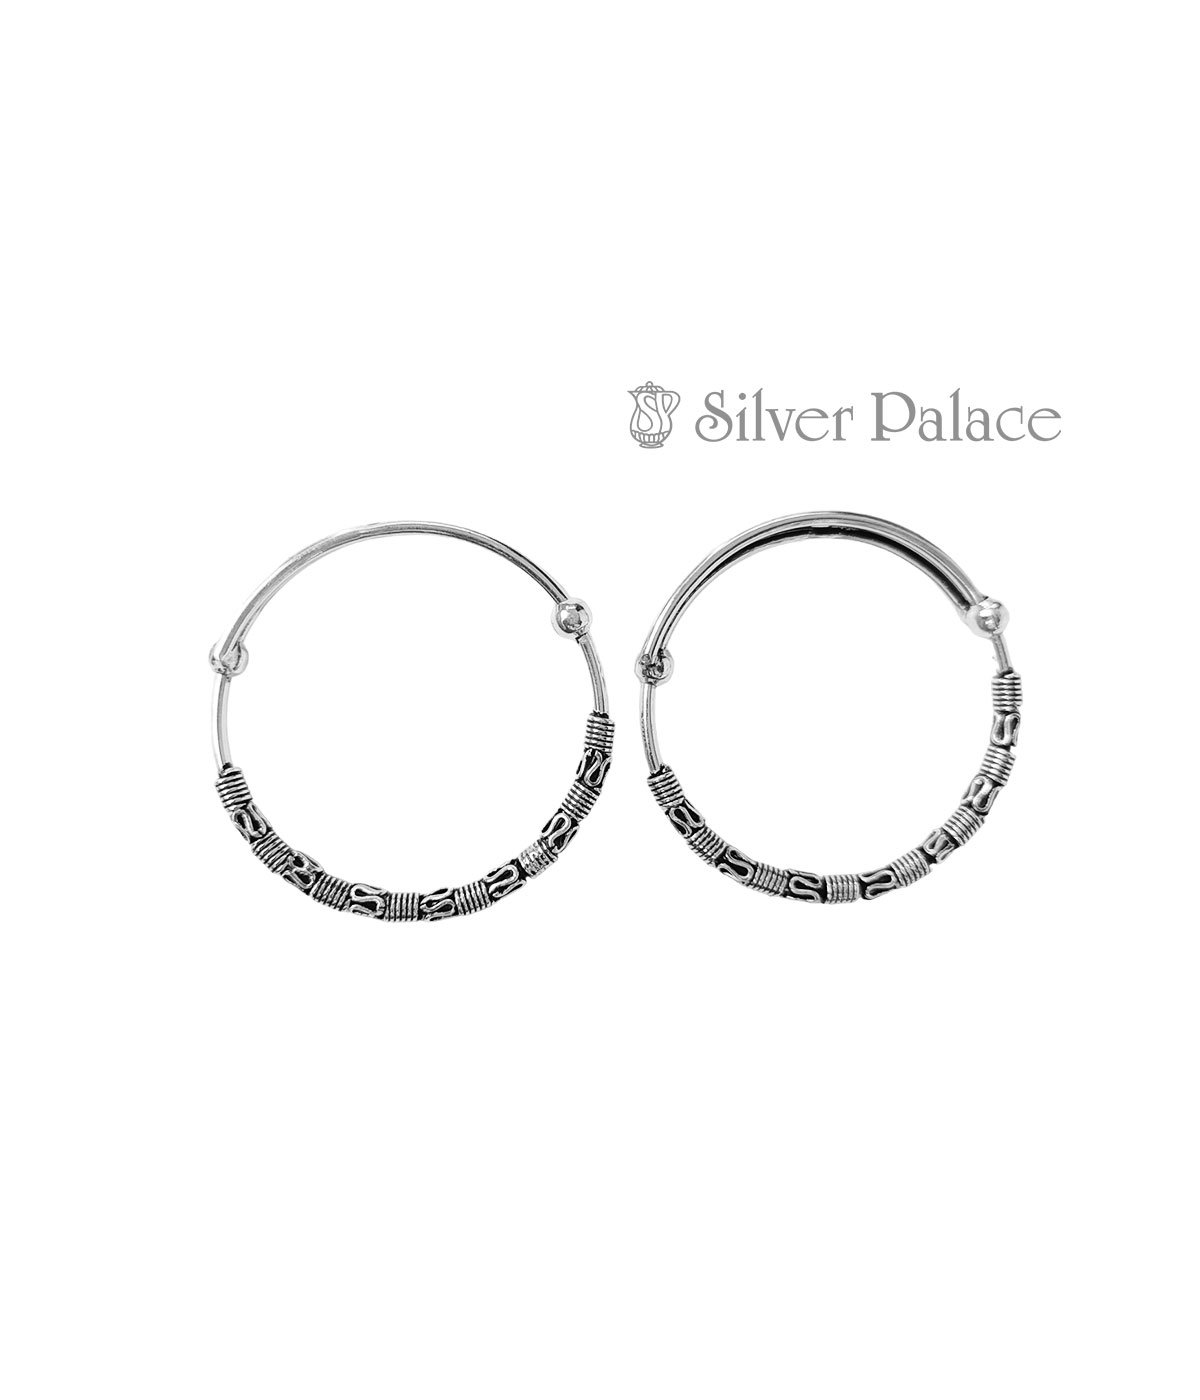 OXIDISED SILVER BEAD DESIGN KIDS PAIR KADA FOR ANKLE AND WRIST